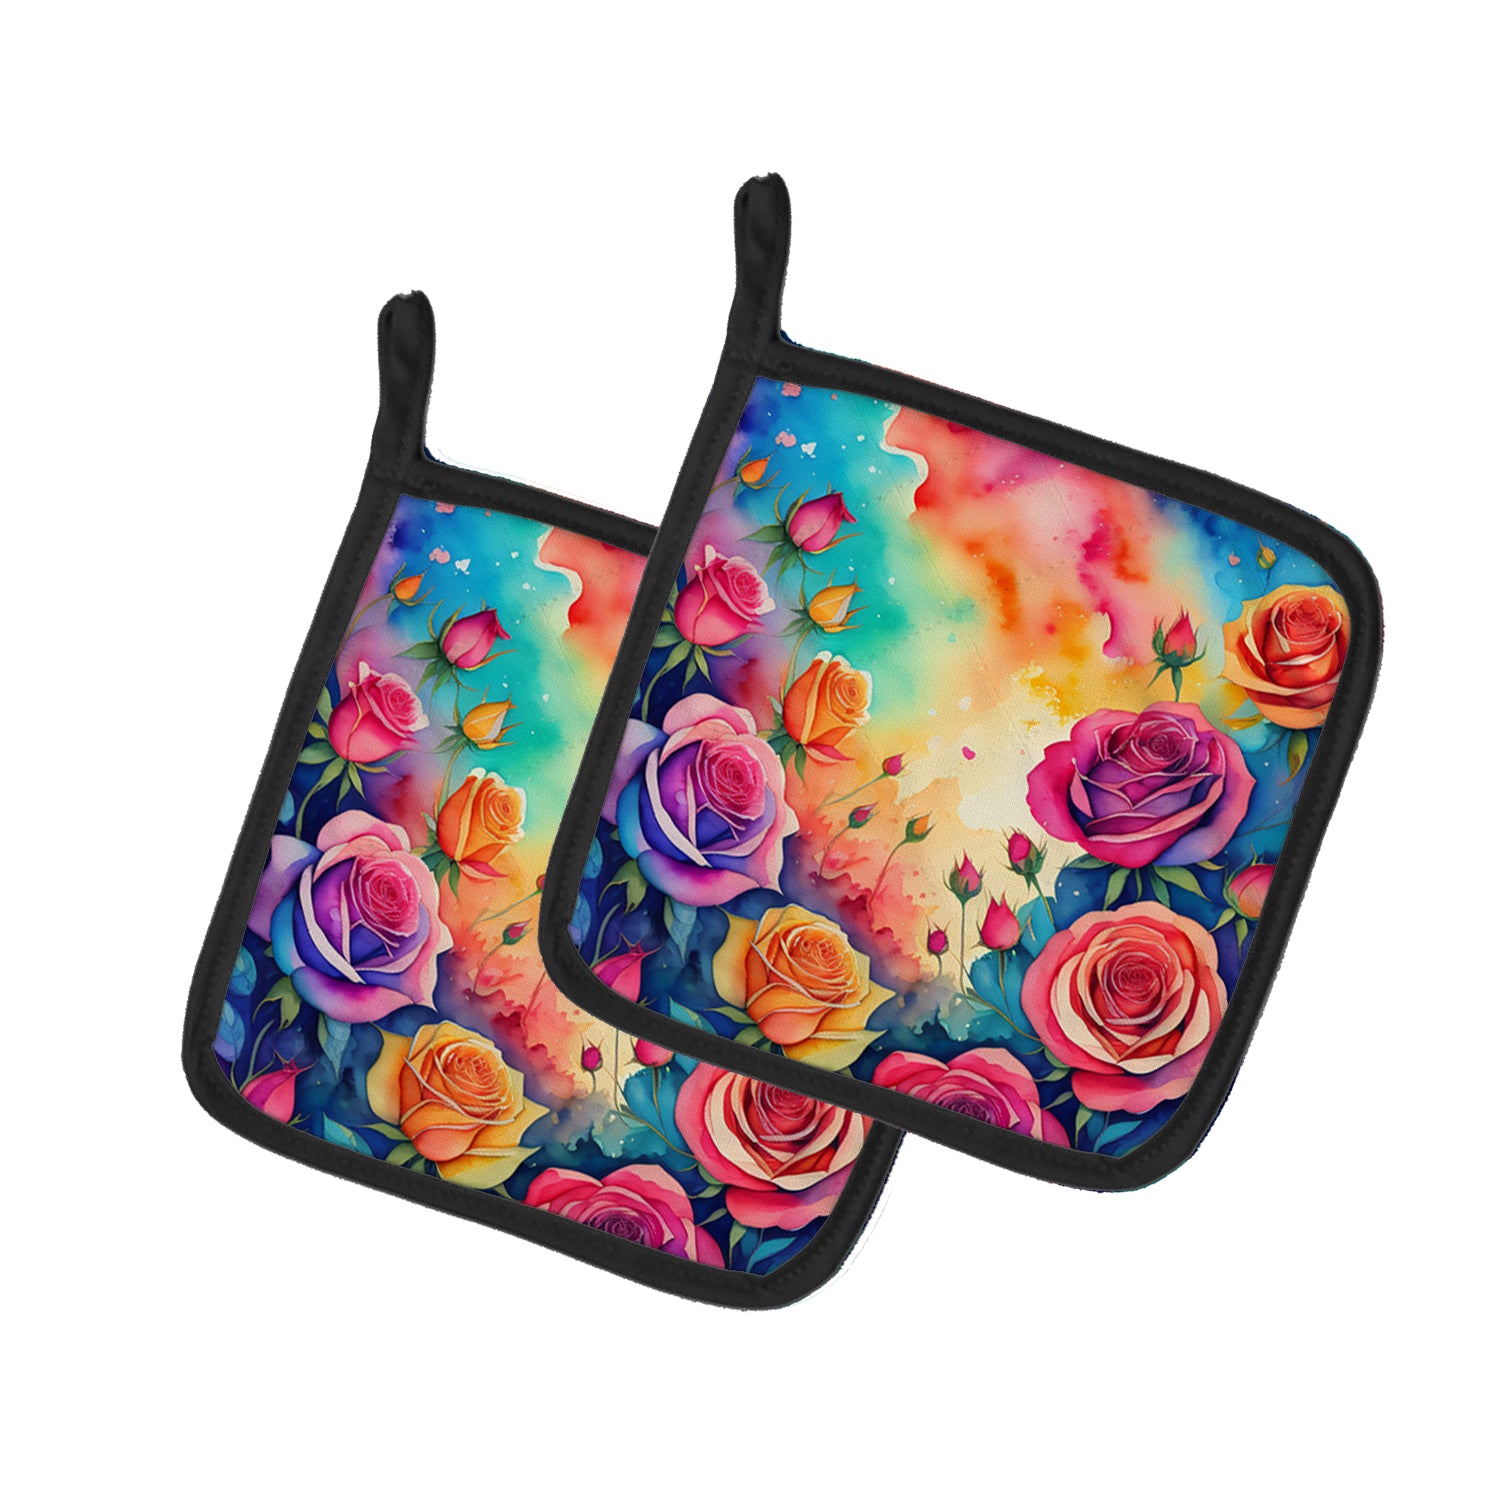 Buy this Colorful Roses Pair of Pot Holders